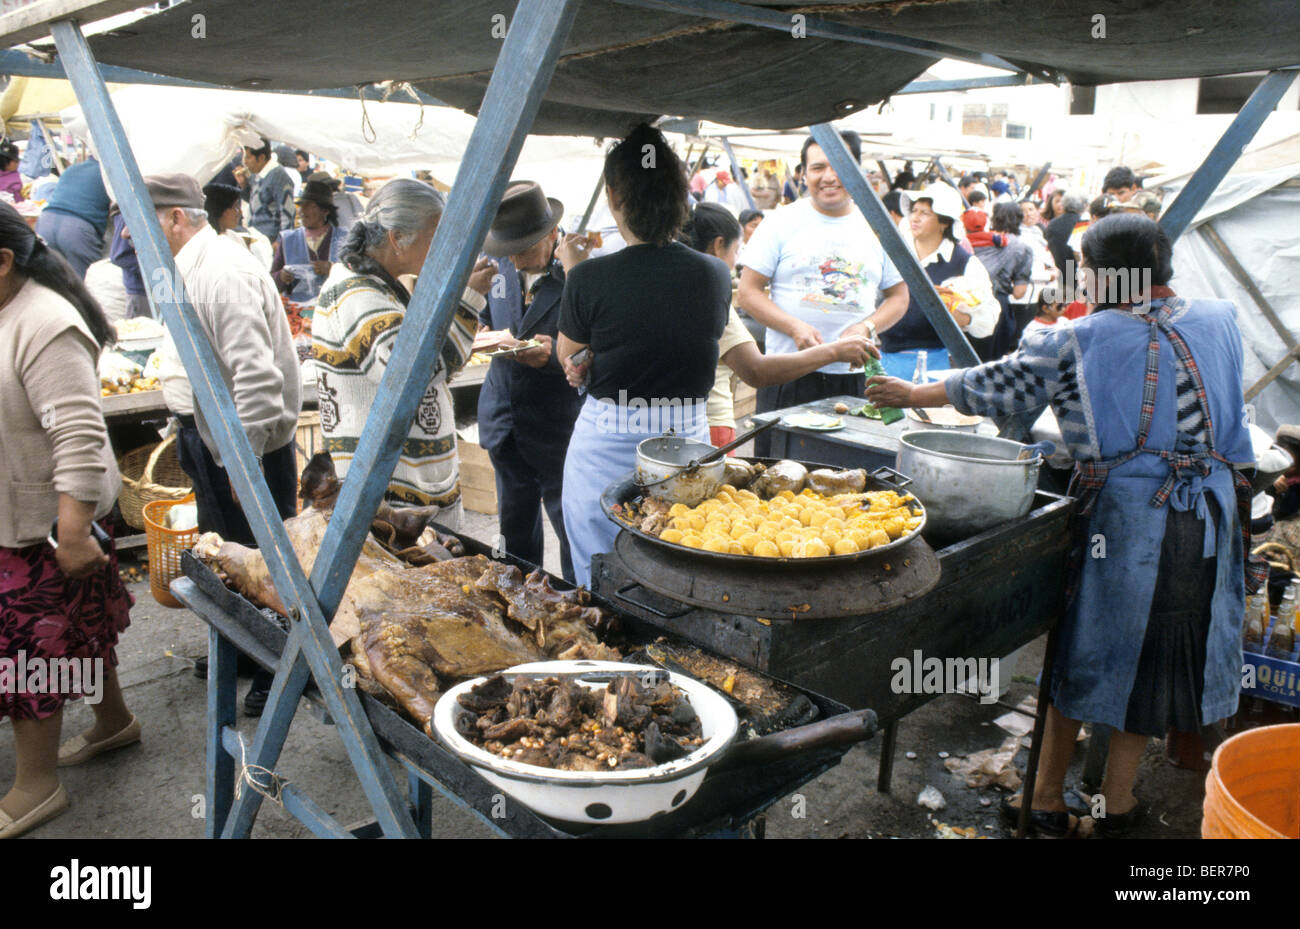 Local ecuadorian delicacy, whole roasted pig laid out on market stall. Stock Photo